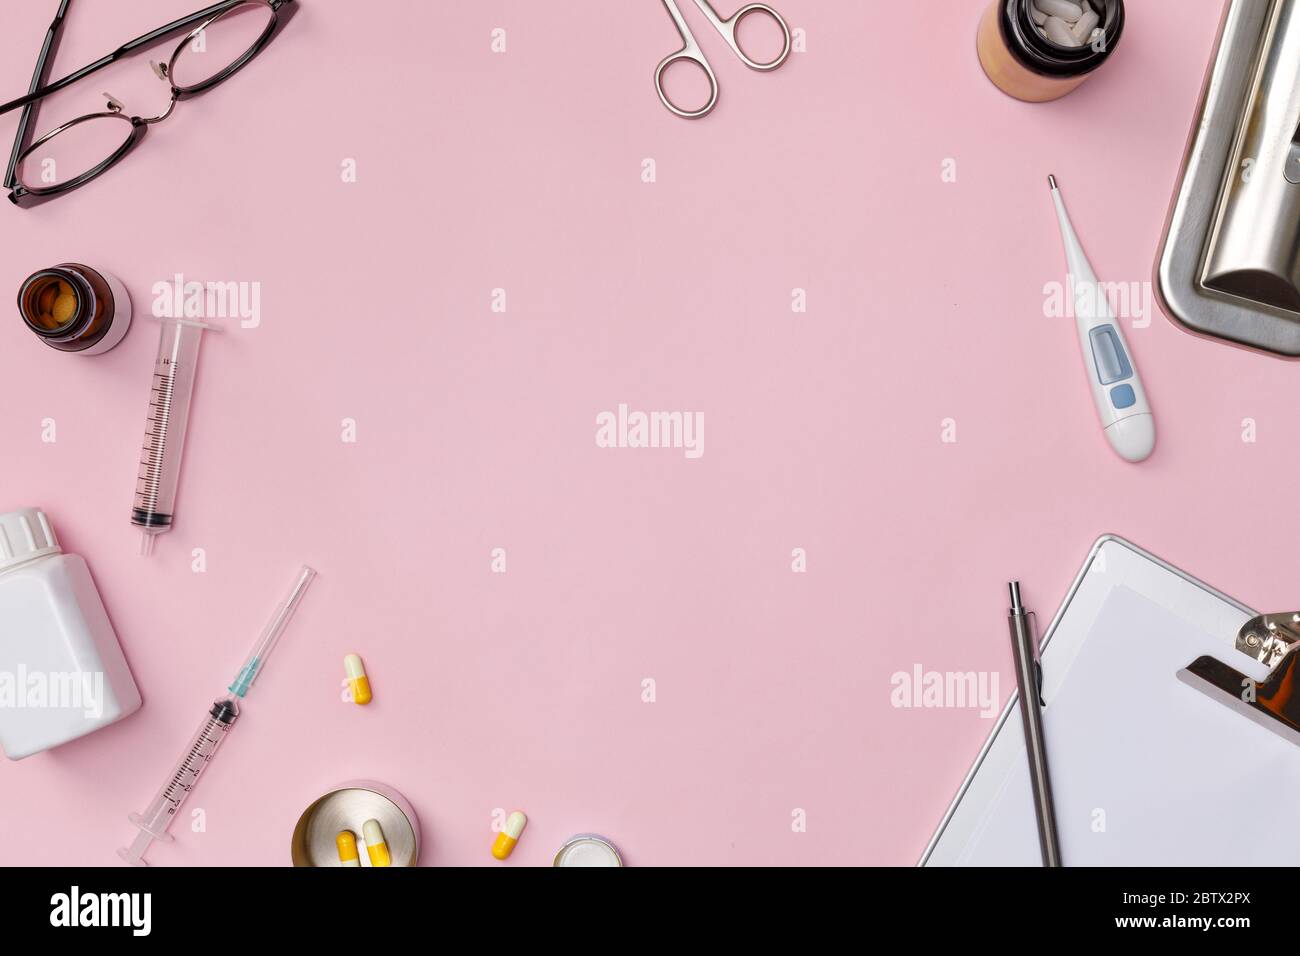 Creative flatlay of doctor medical equipment pink table with stethoscope, medical documents, thermometer, syringe and pills, Health care concept, Top Stock Photo